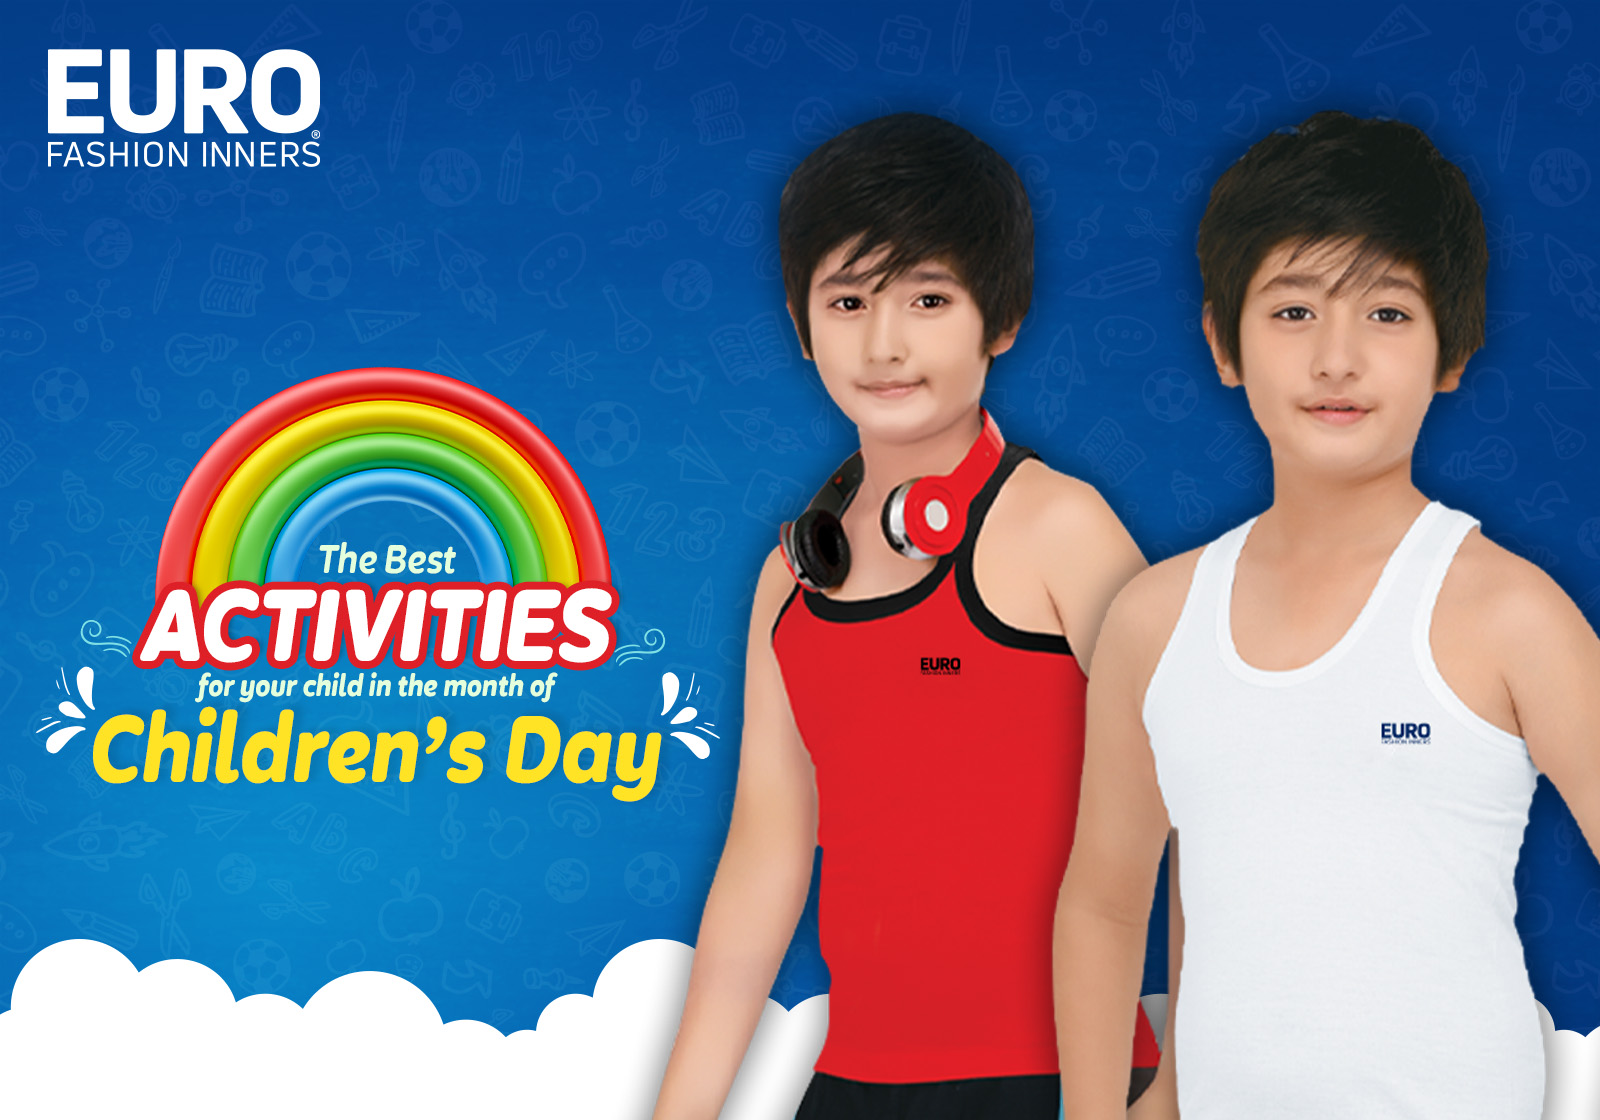 The best activities for your child In the month of Children’s Day…